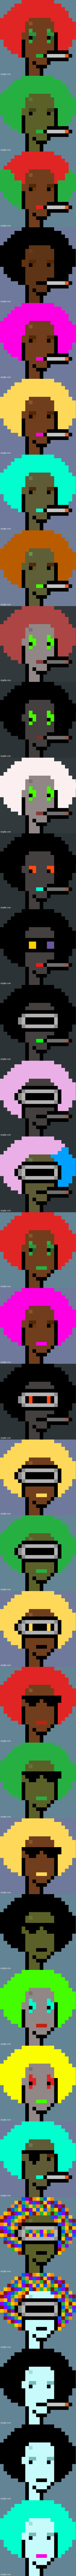 Afro Punks collection image